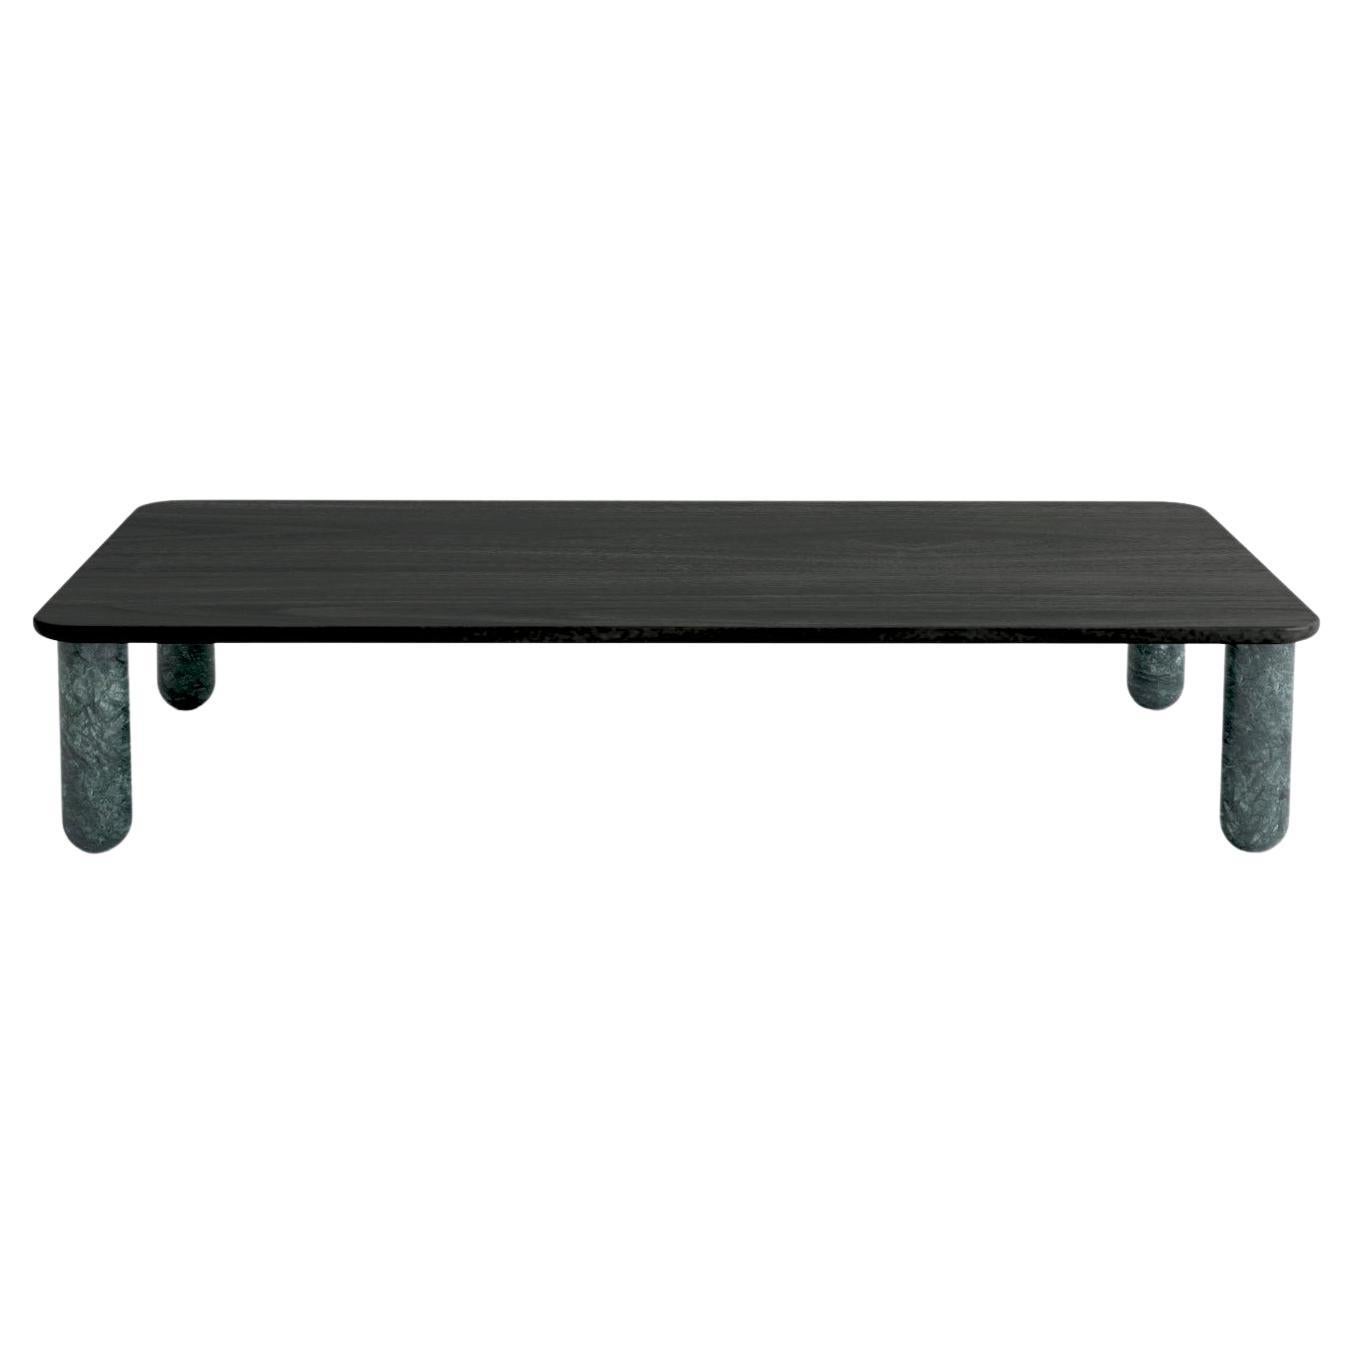 Black Wood and Green Marble "Sunday" Coffee Table, Jean-Baptiste Souletie For Sale